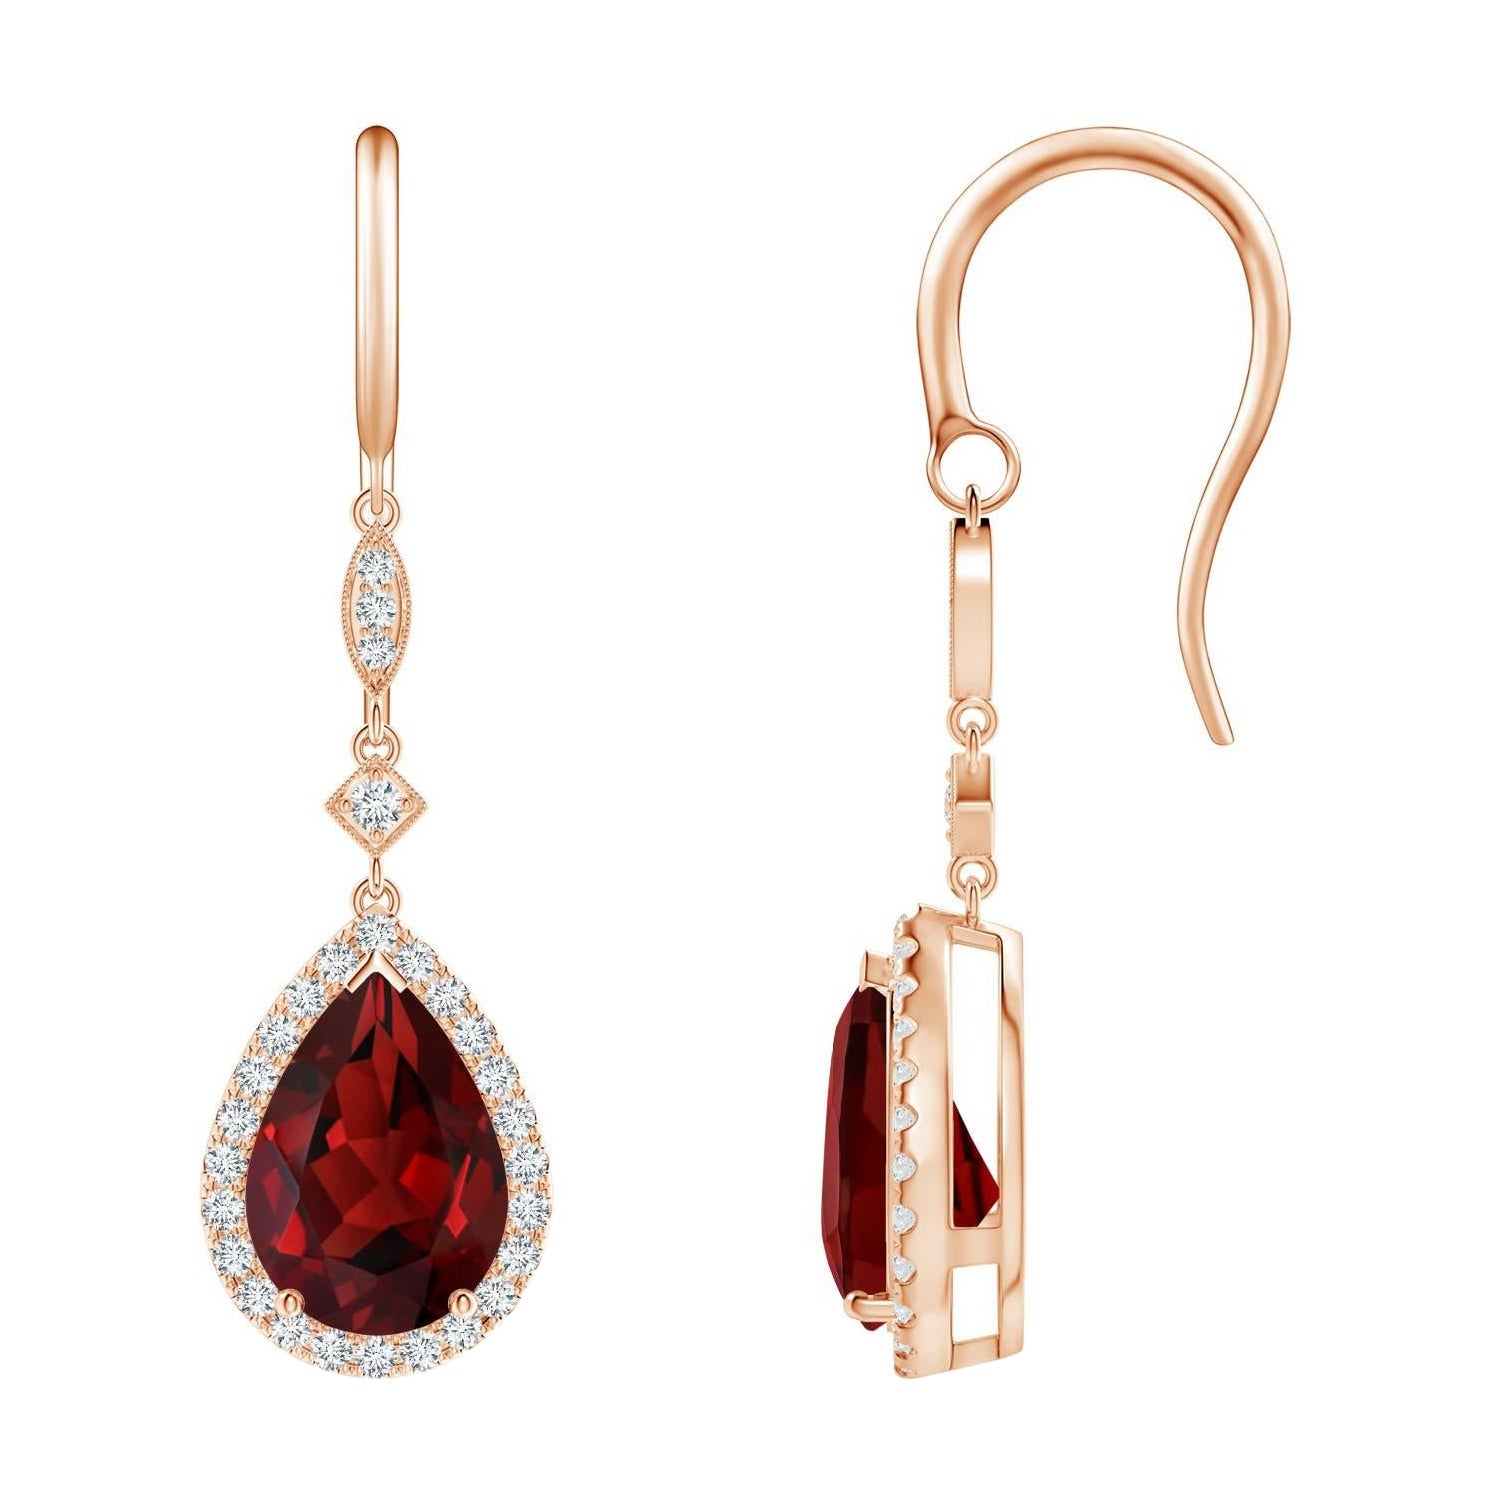 Natural Pear-Shaped 4.2ct Garnet Drop Earrings with Diamond in 14K Rose Gold